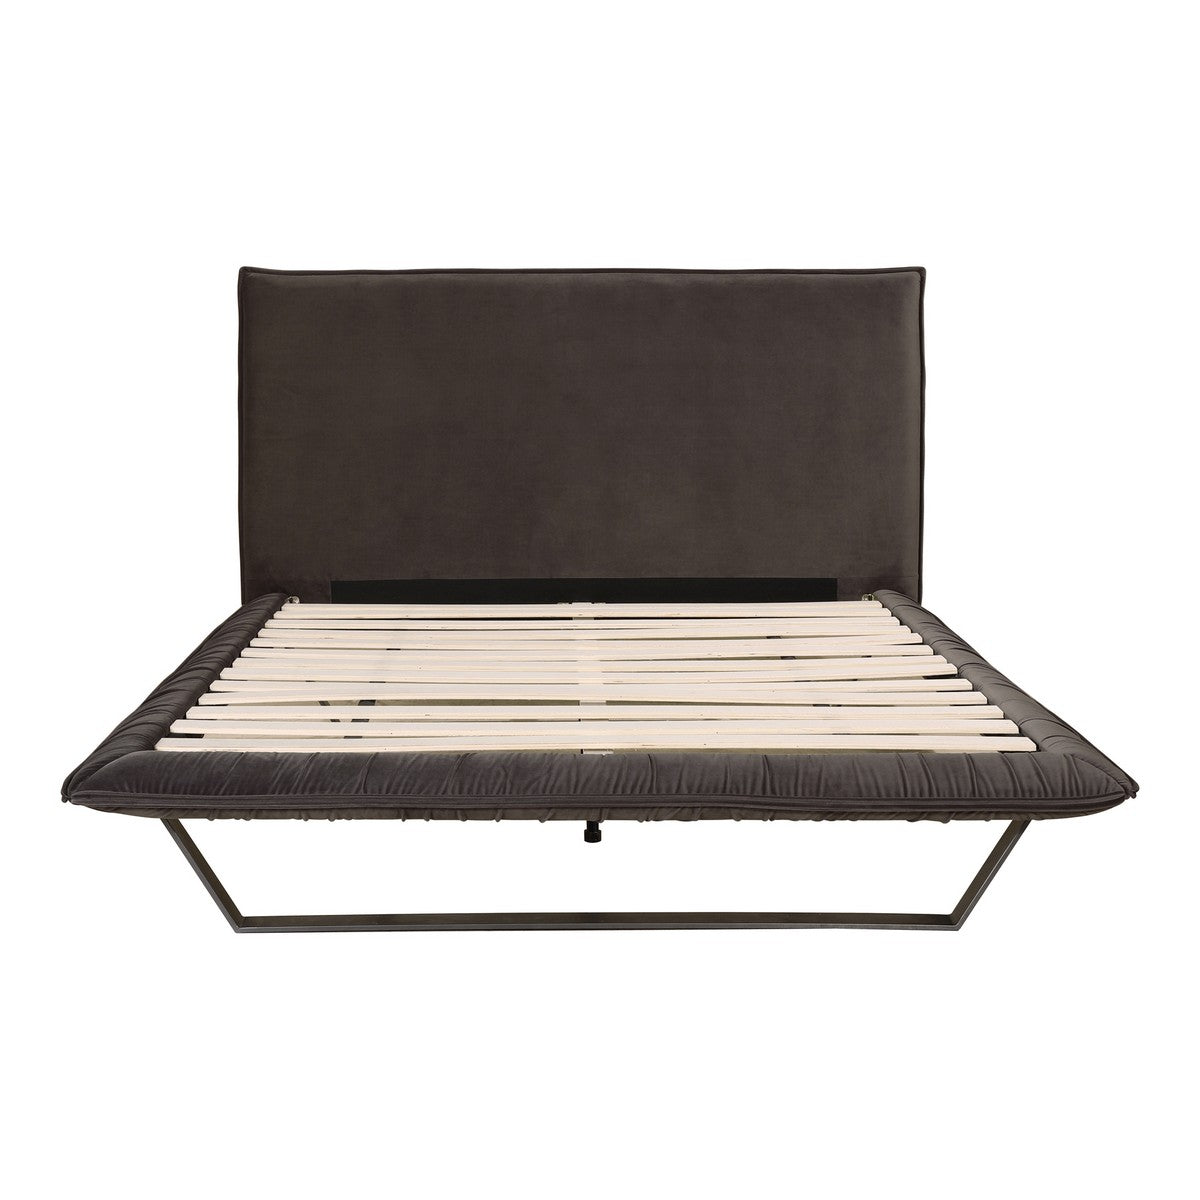 Moe's Home Collection Manilla Queen Bed Slate - RN-1127-25 - Moe's Home Collection - Beds - Minimal And Modern - 1